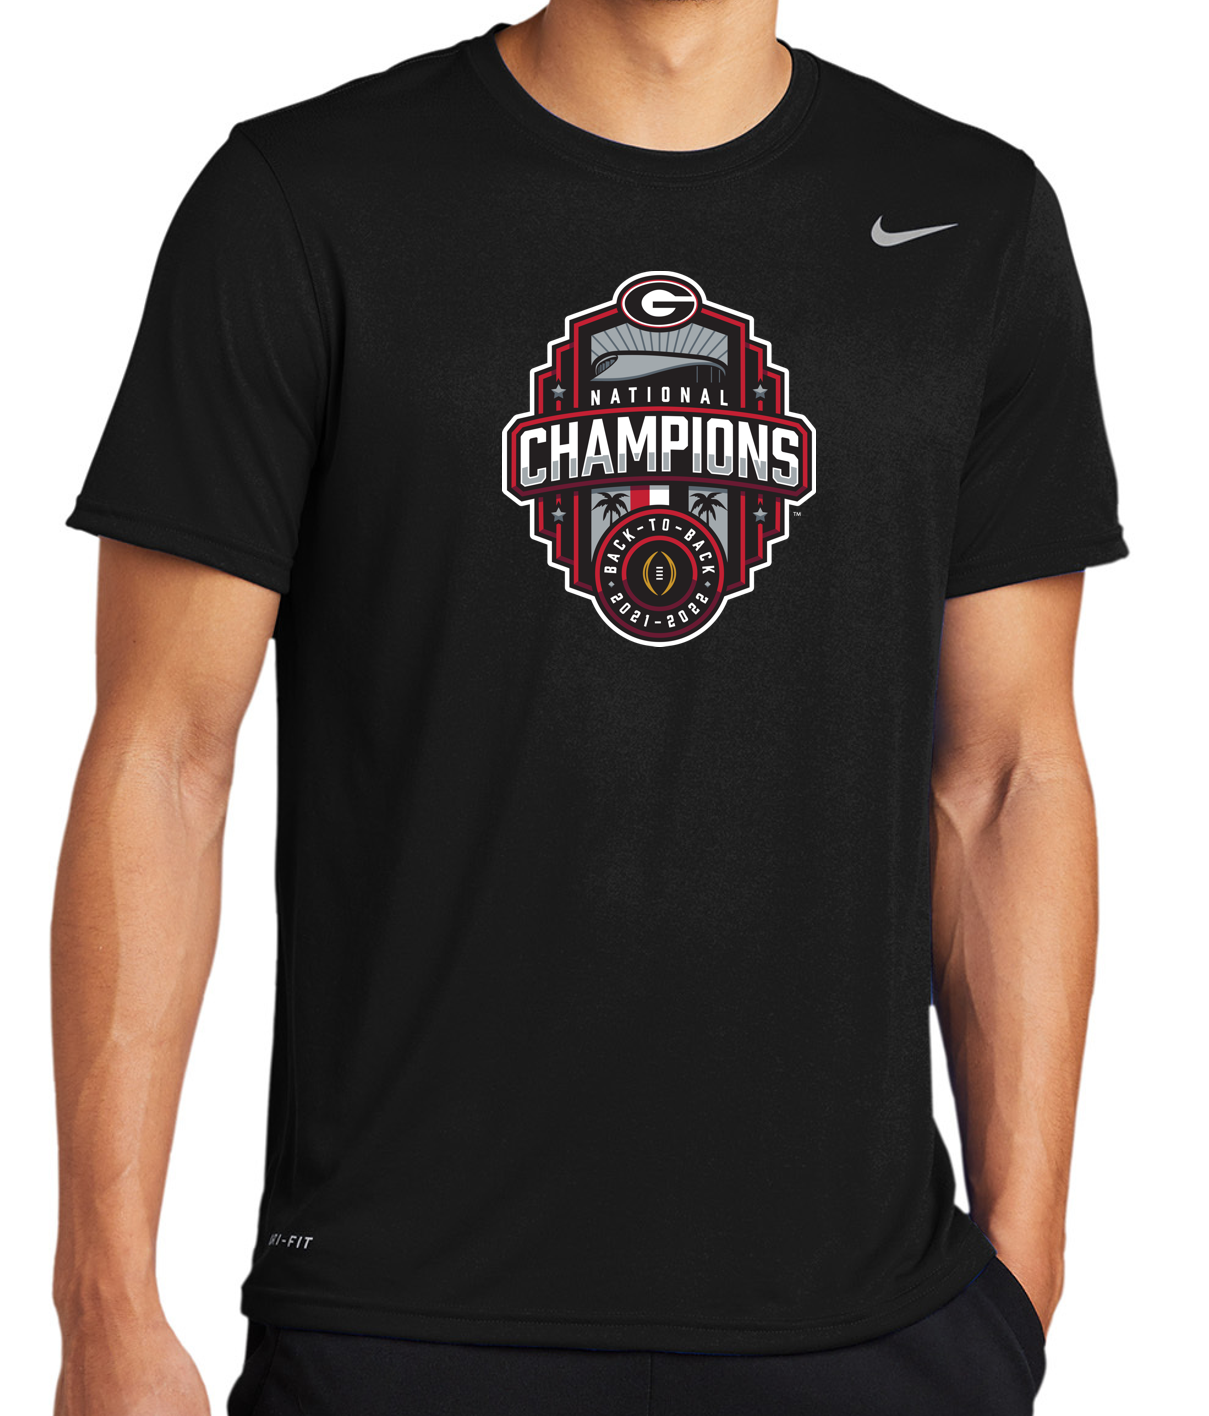 Back to Back Championship Logo Nike Brand Youth and Adult Dri-Fit Short Sleeve T-Shirt